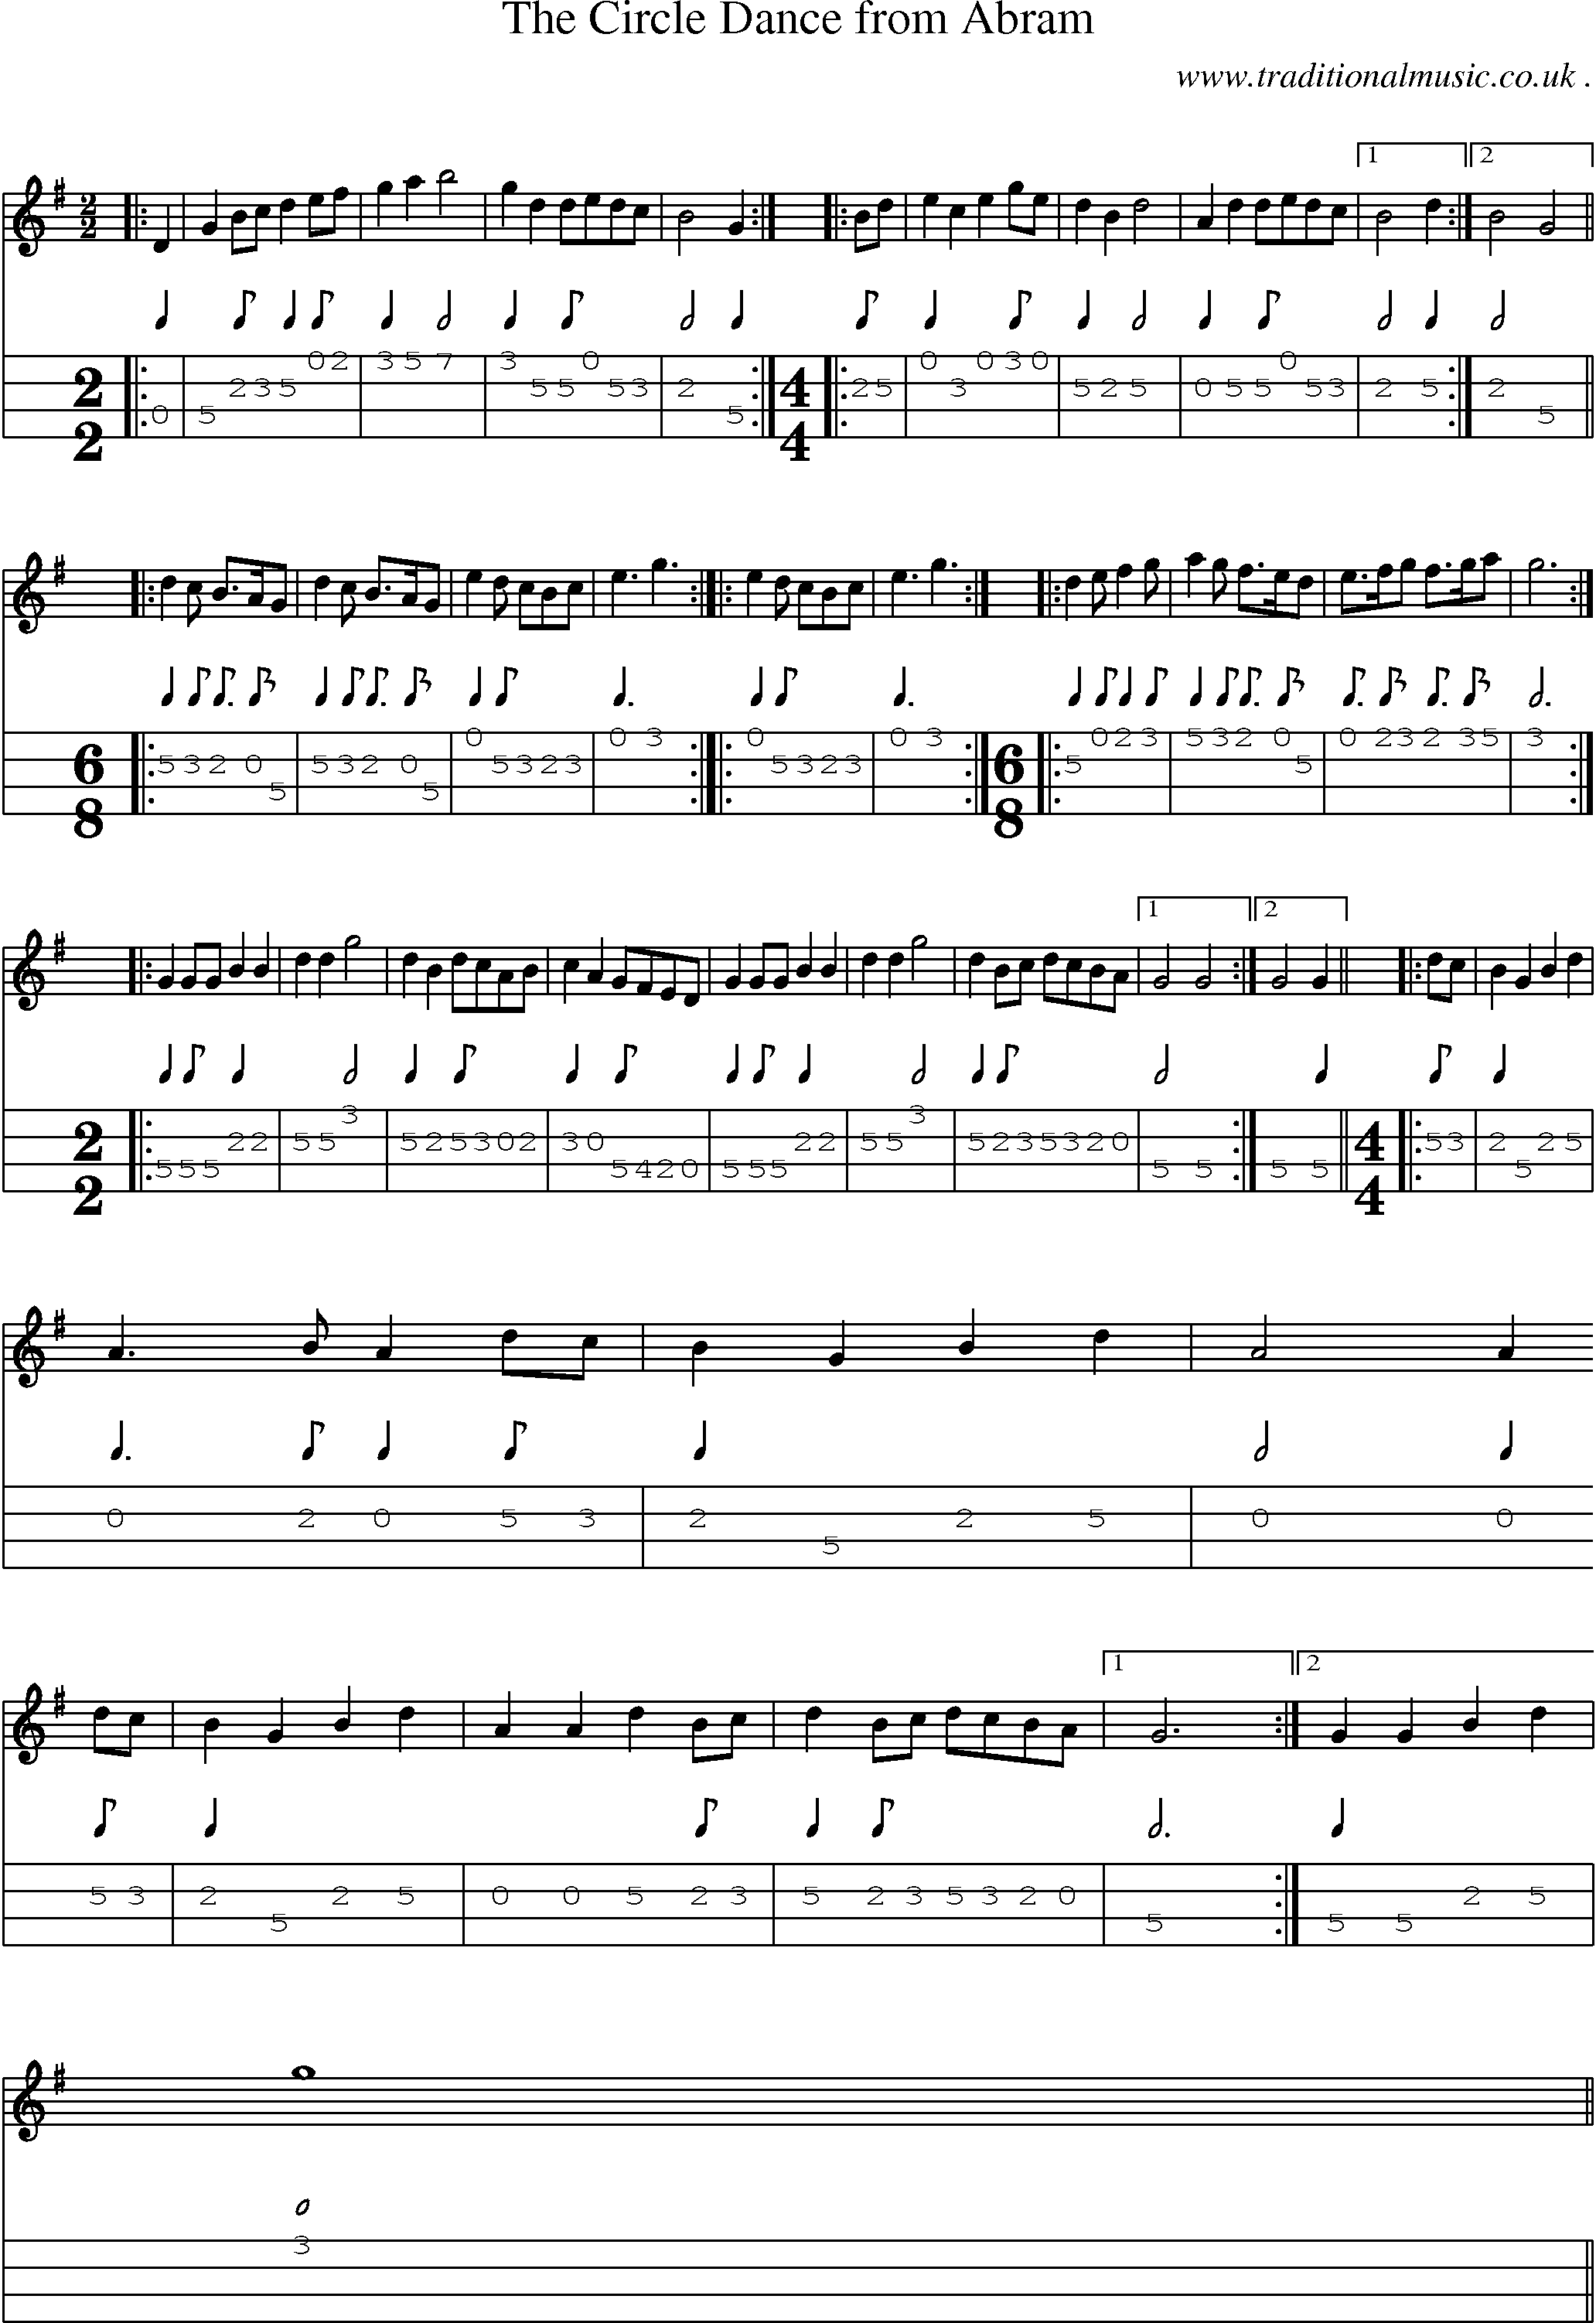 Sheet-Music and Mandolin Tabs for The Circle Dance From Abram